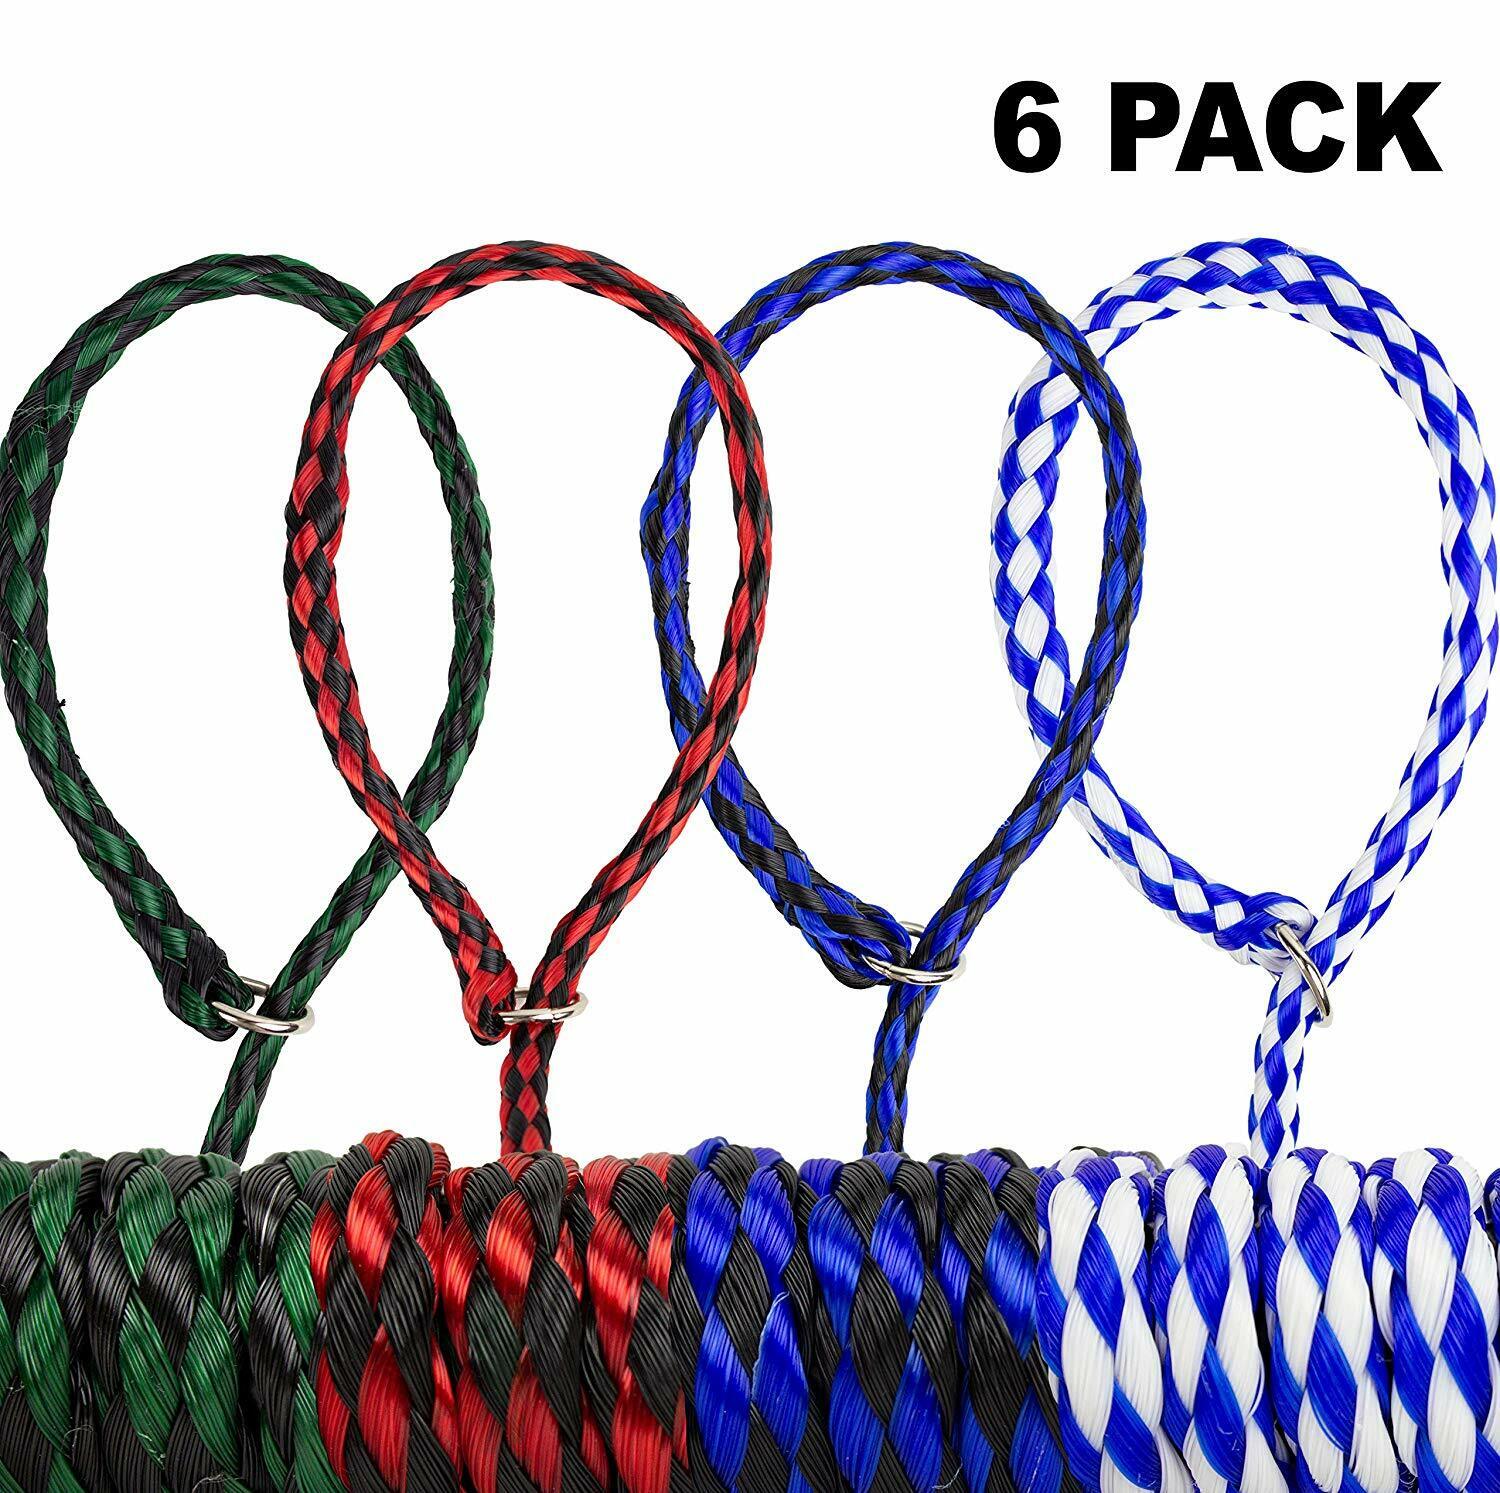 Durable Braided Poly Slip Leads Animal Control Kennel 5 FT Strong 6 Pack 12 24